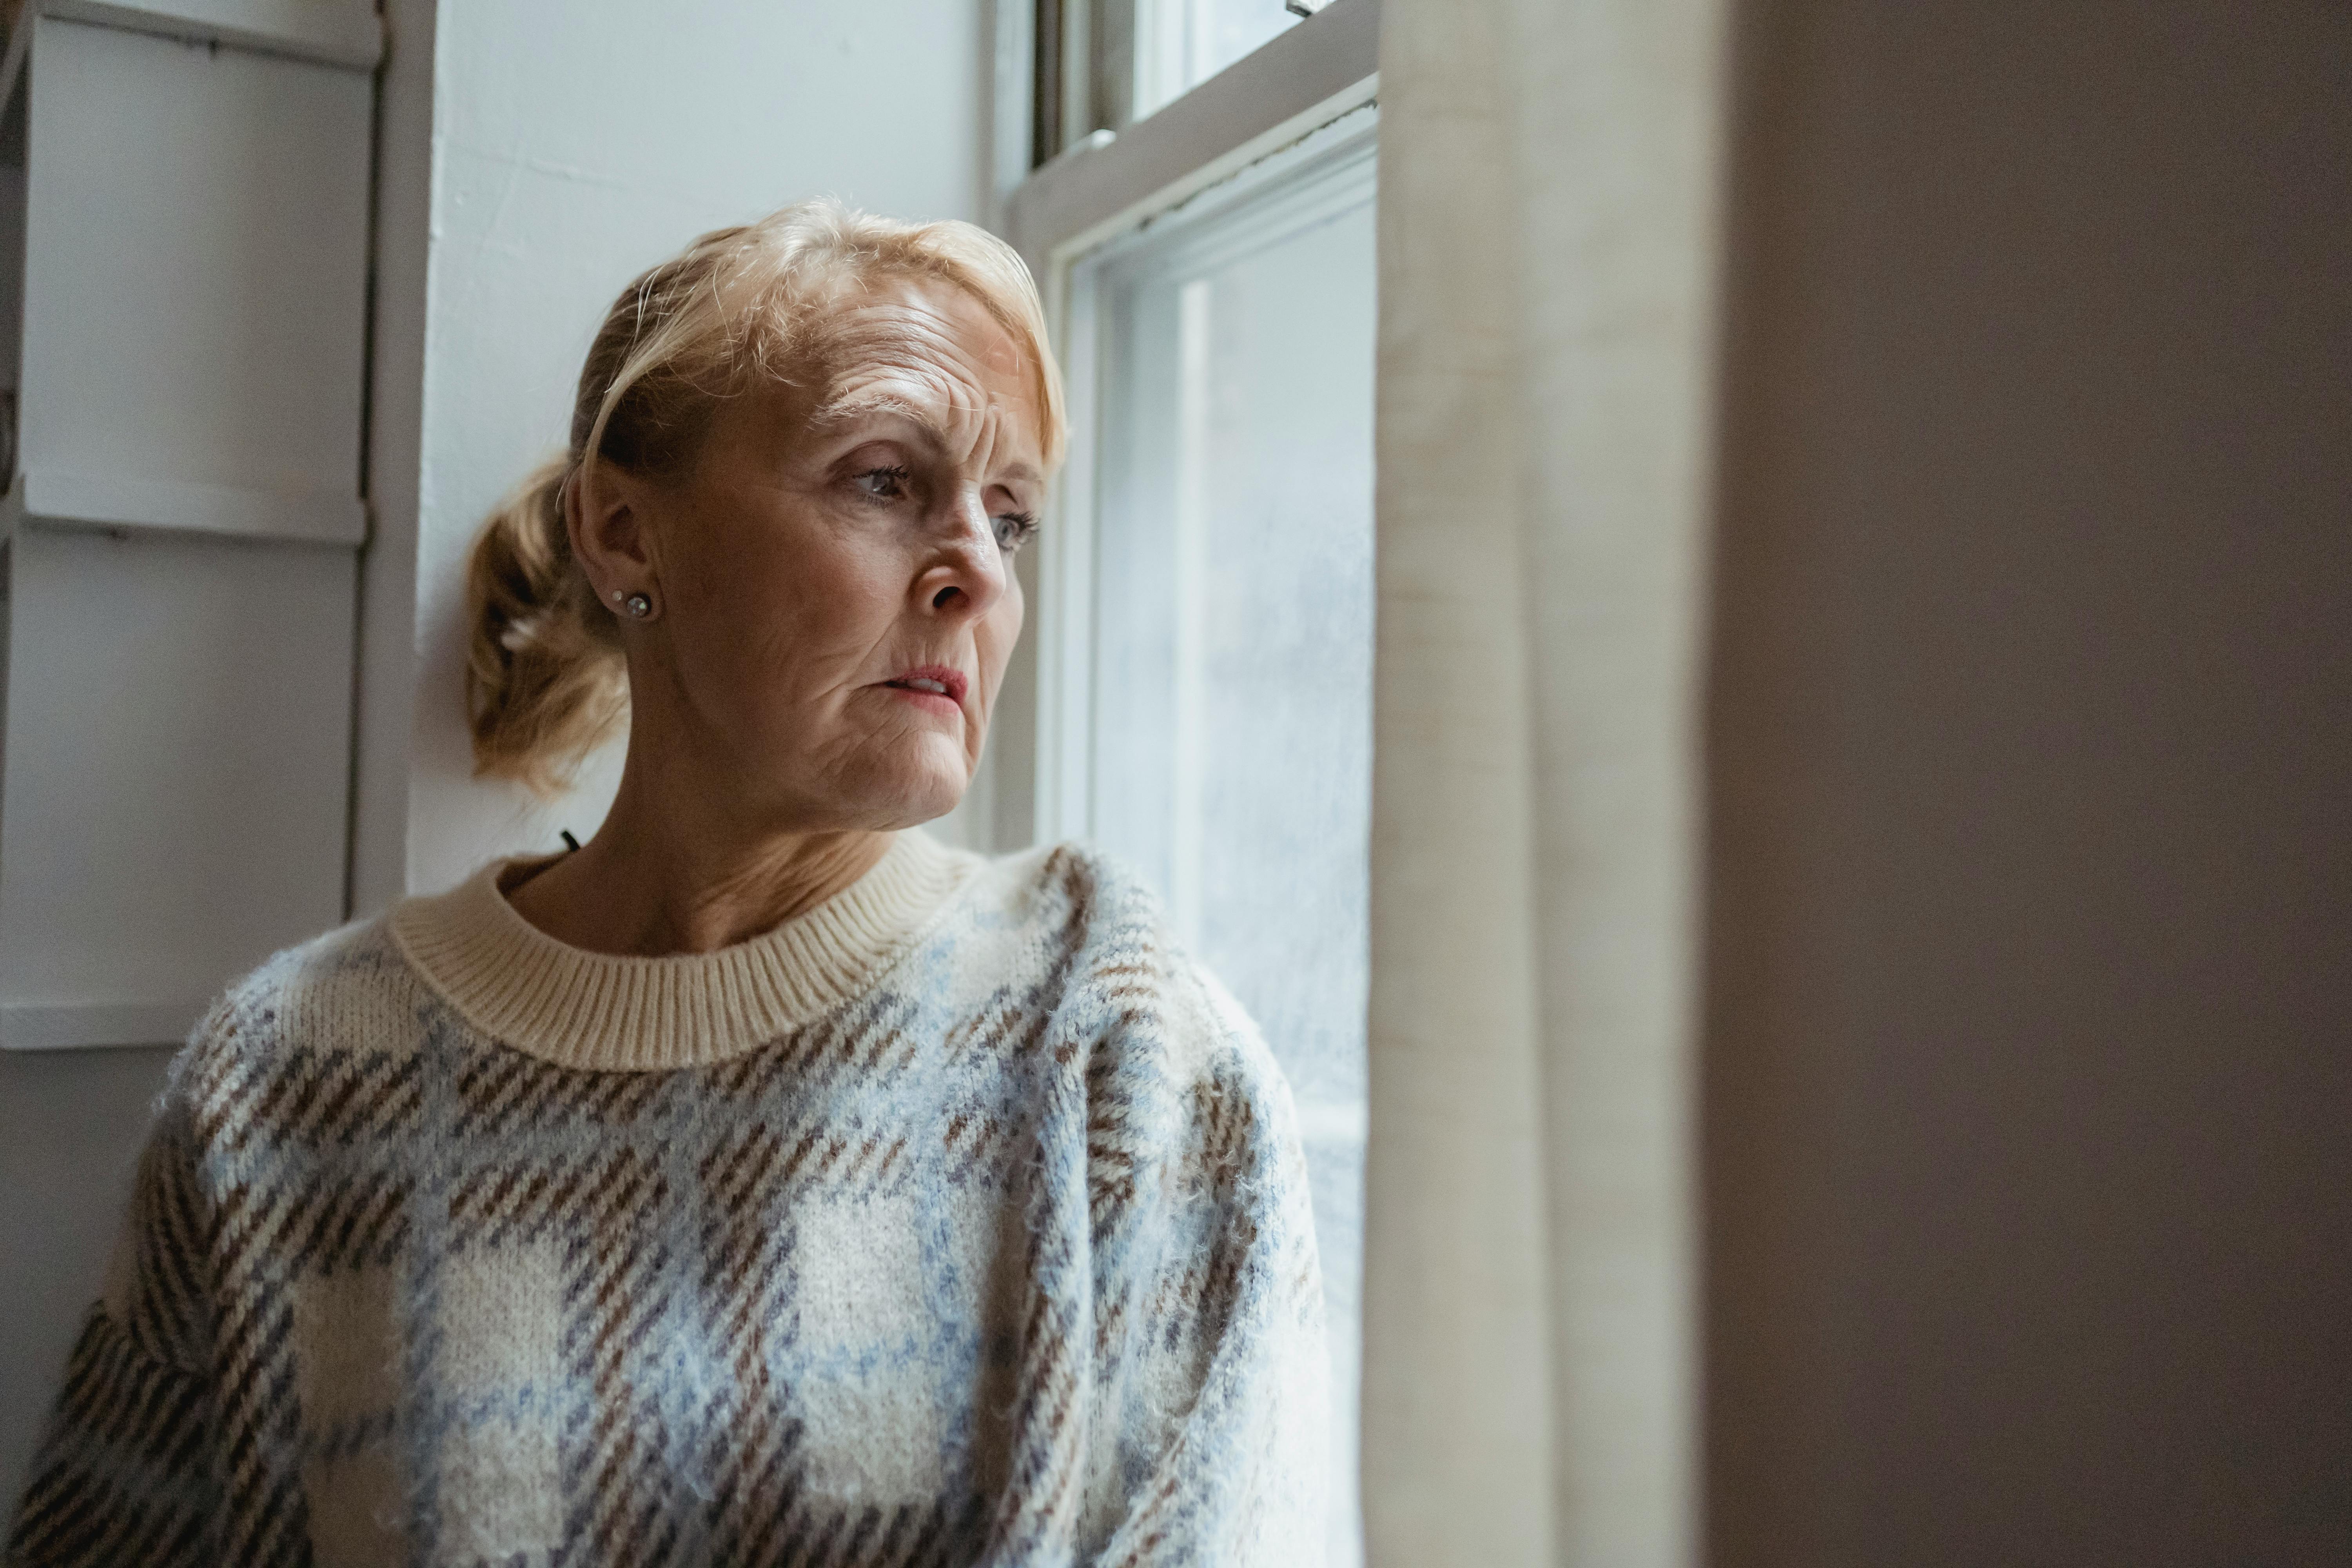 An older woman looking sad while looking outside a window | Source: Pexels